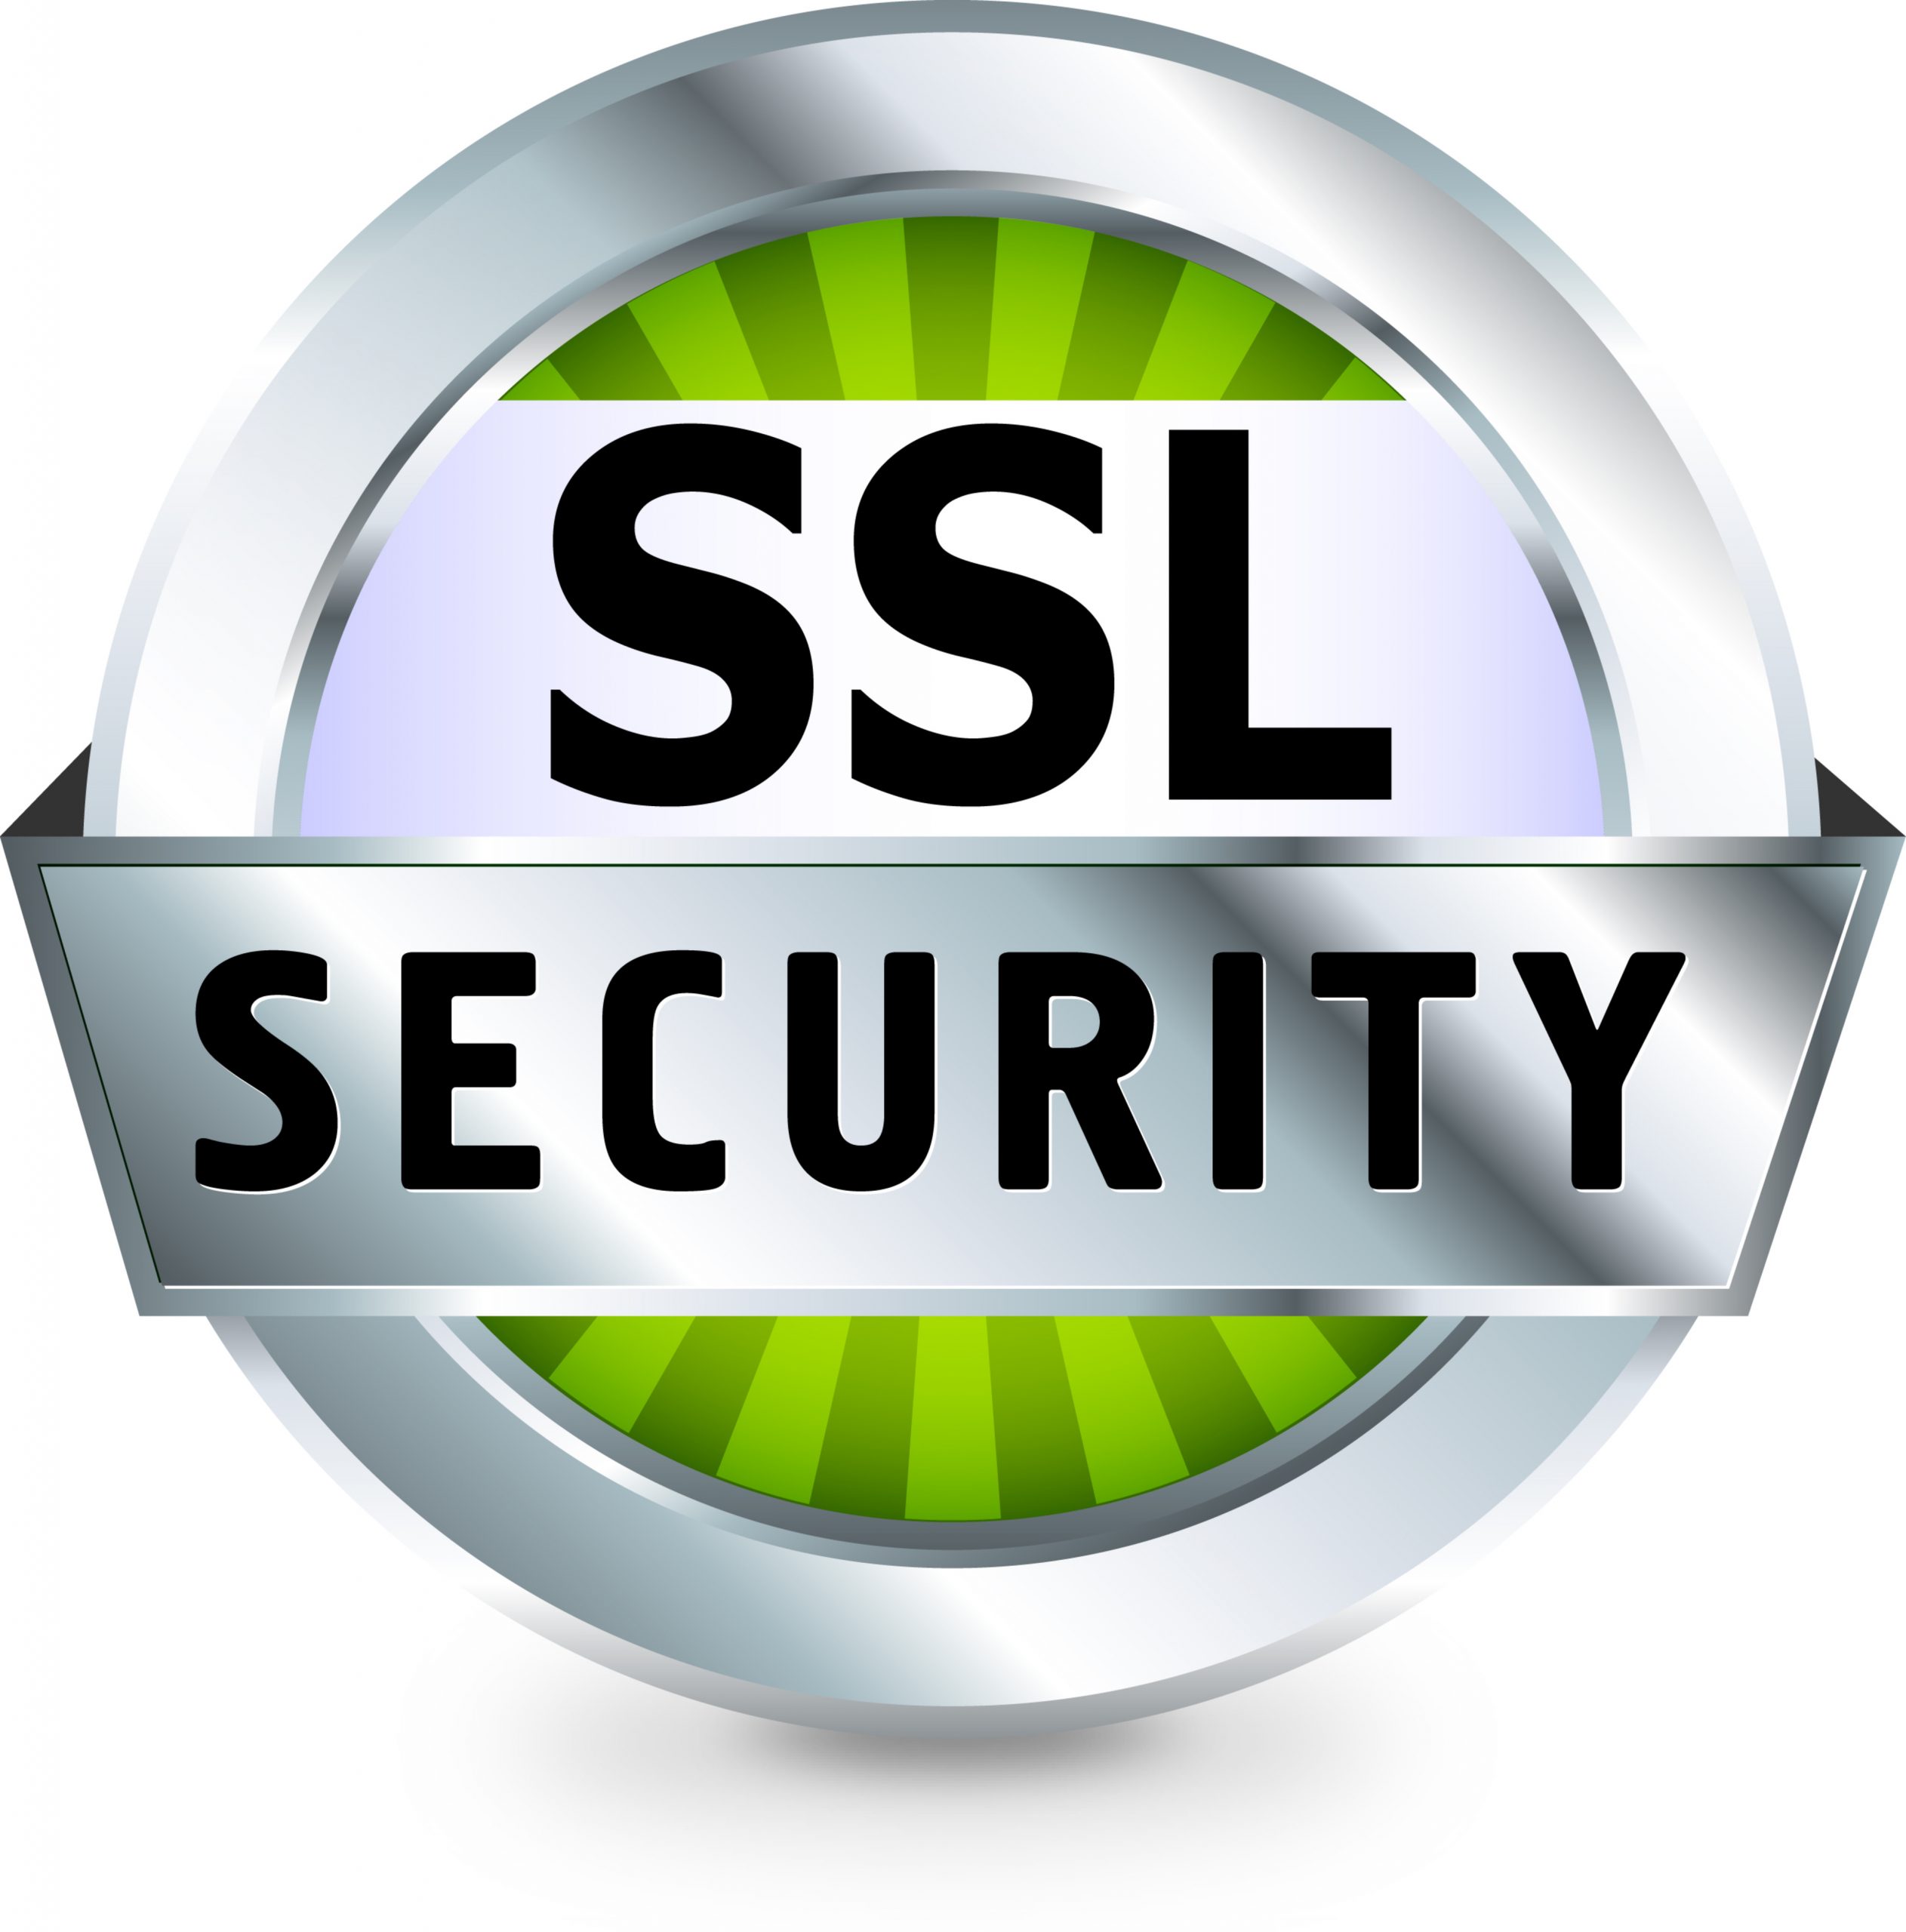 The Benefits Of An SSL Certificate For A New Online Business